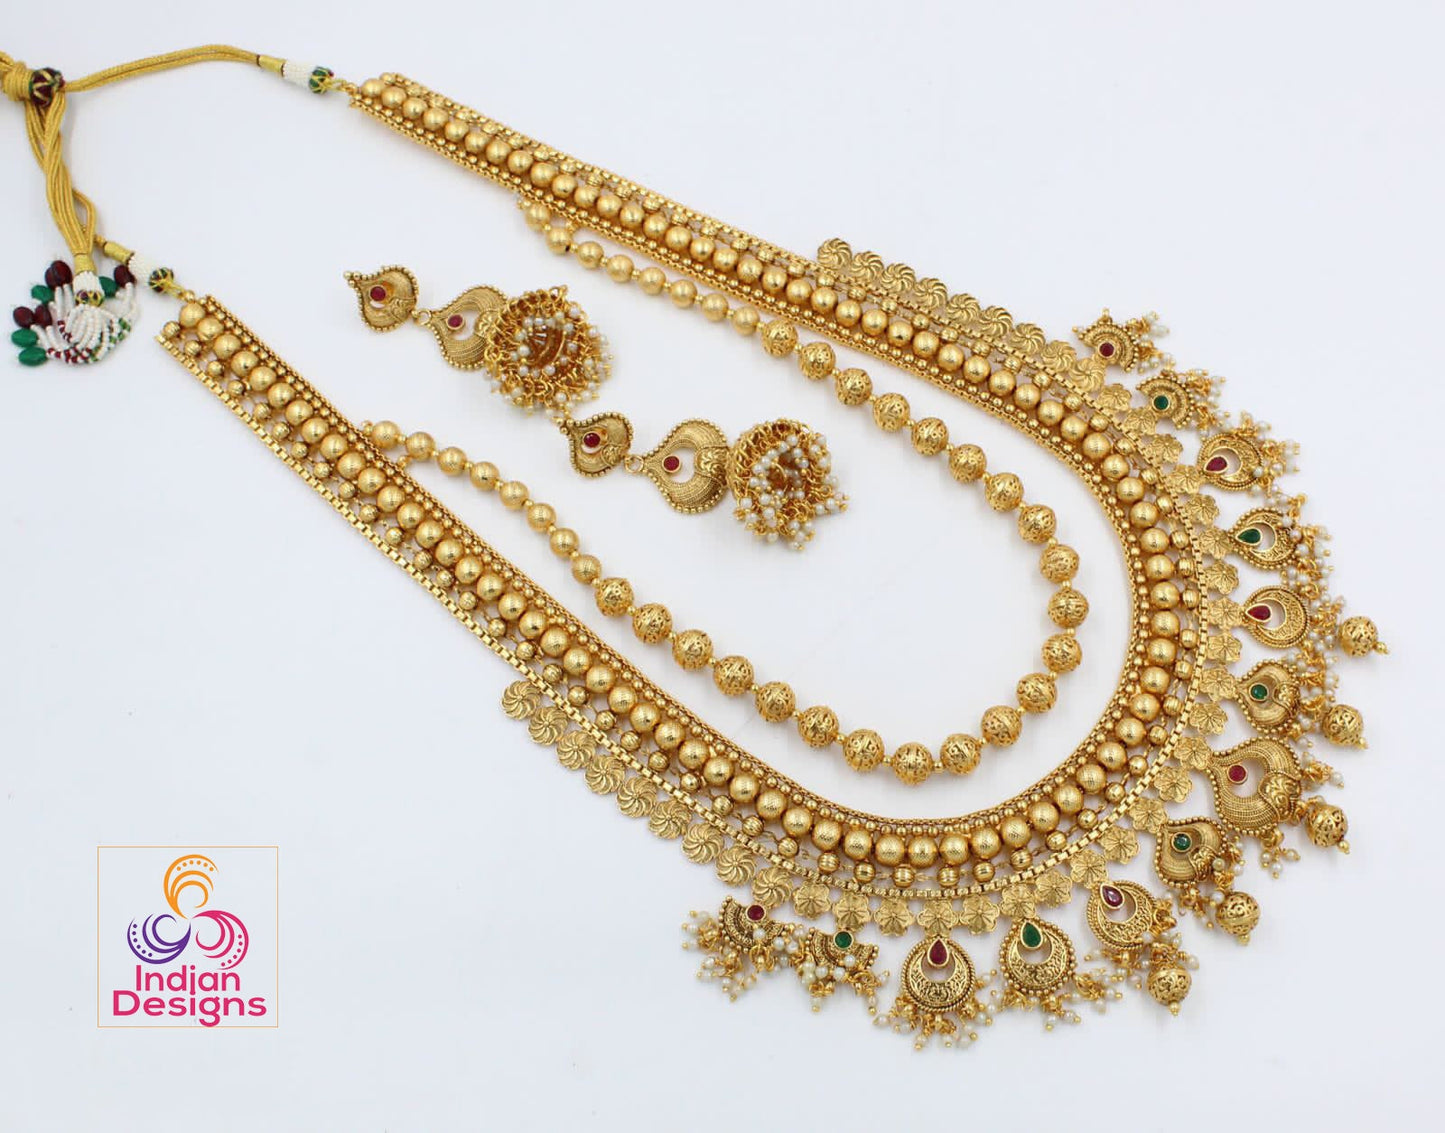 Exclusive Gold plated Long necklace with Jhumka earrings | Indian Designs | South Indian Wedding jewelry